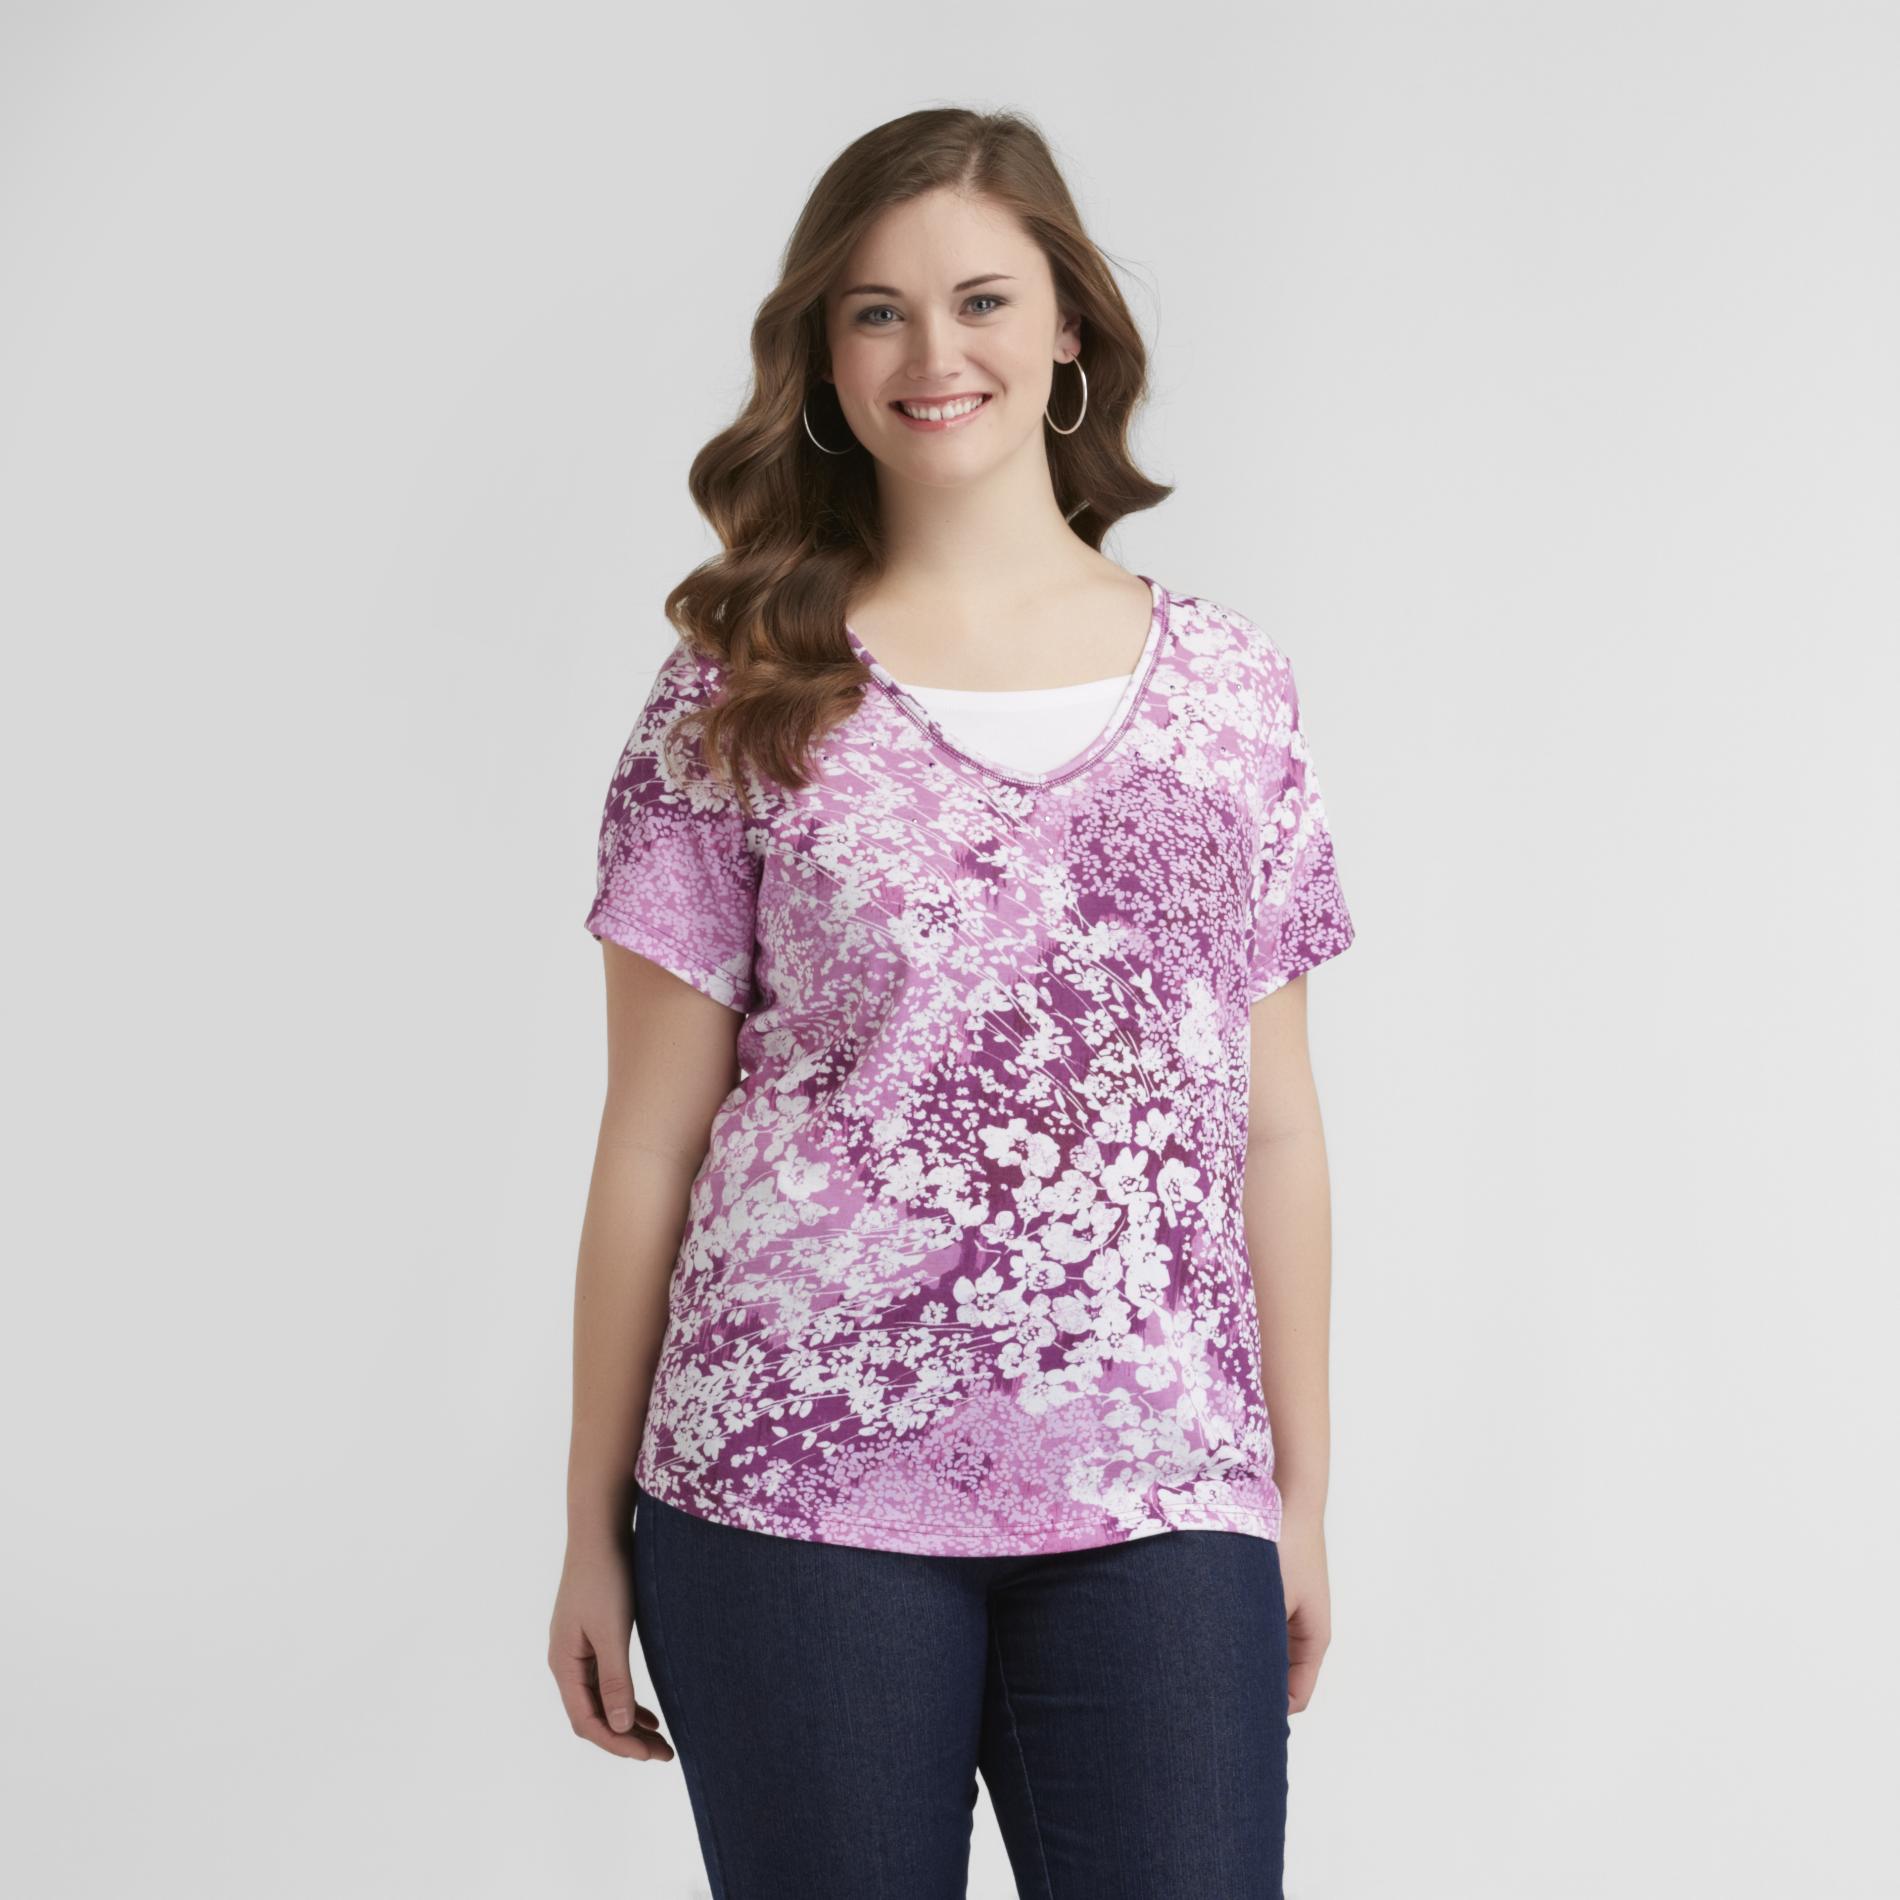 Basic Editions Women's Plus Layered Top - Floral Print